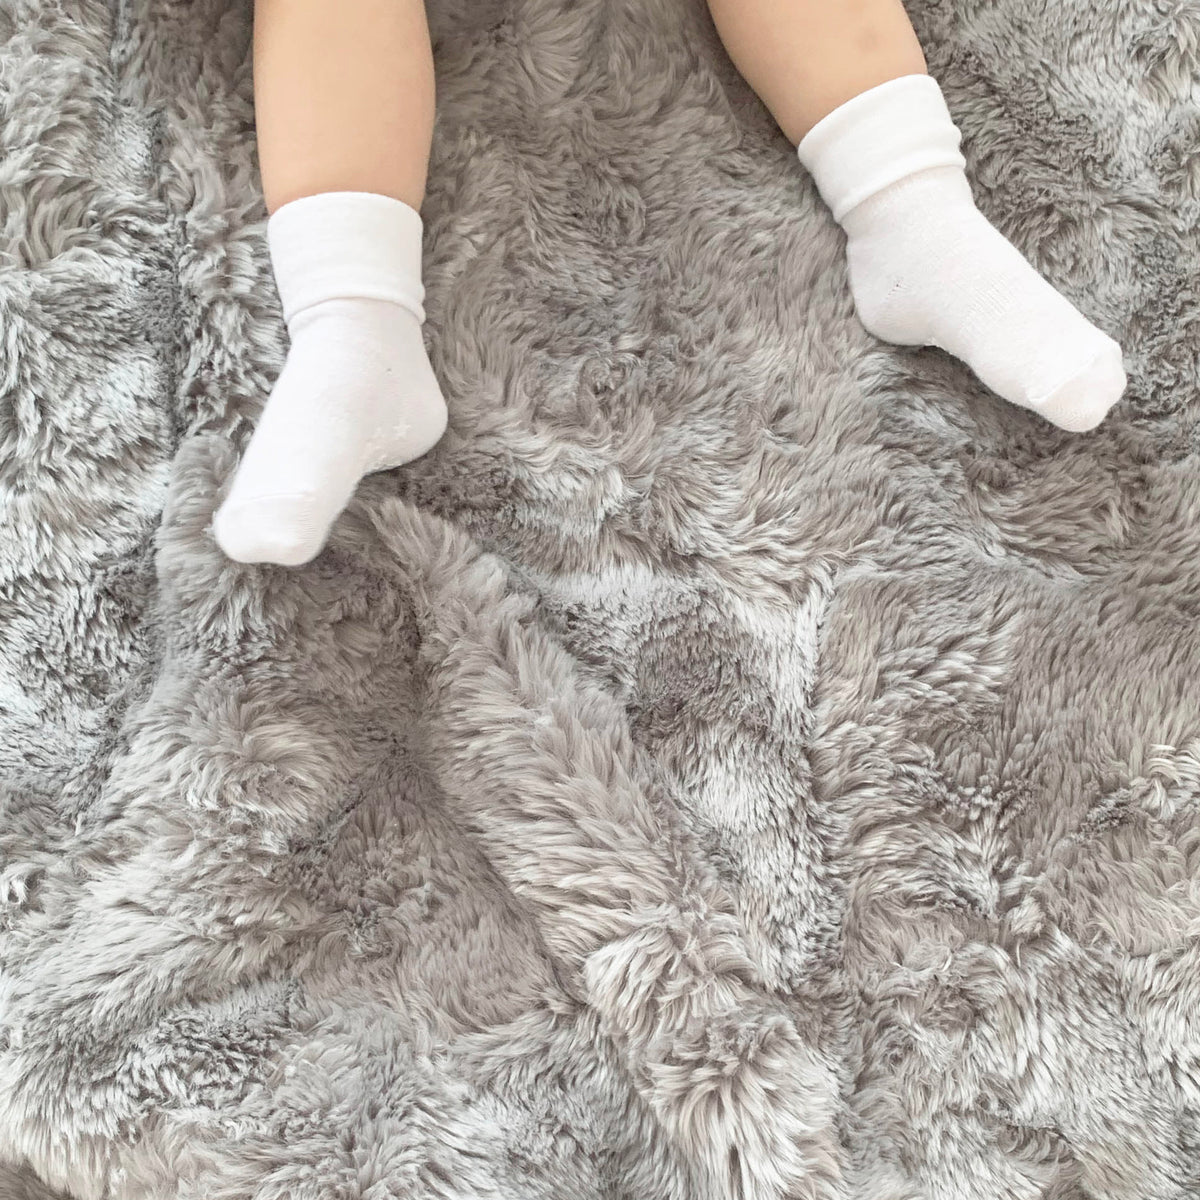 Organic Non-Slip Stay On Baby and Toddler Socks in Marshmallow